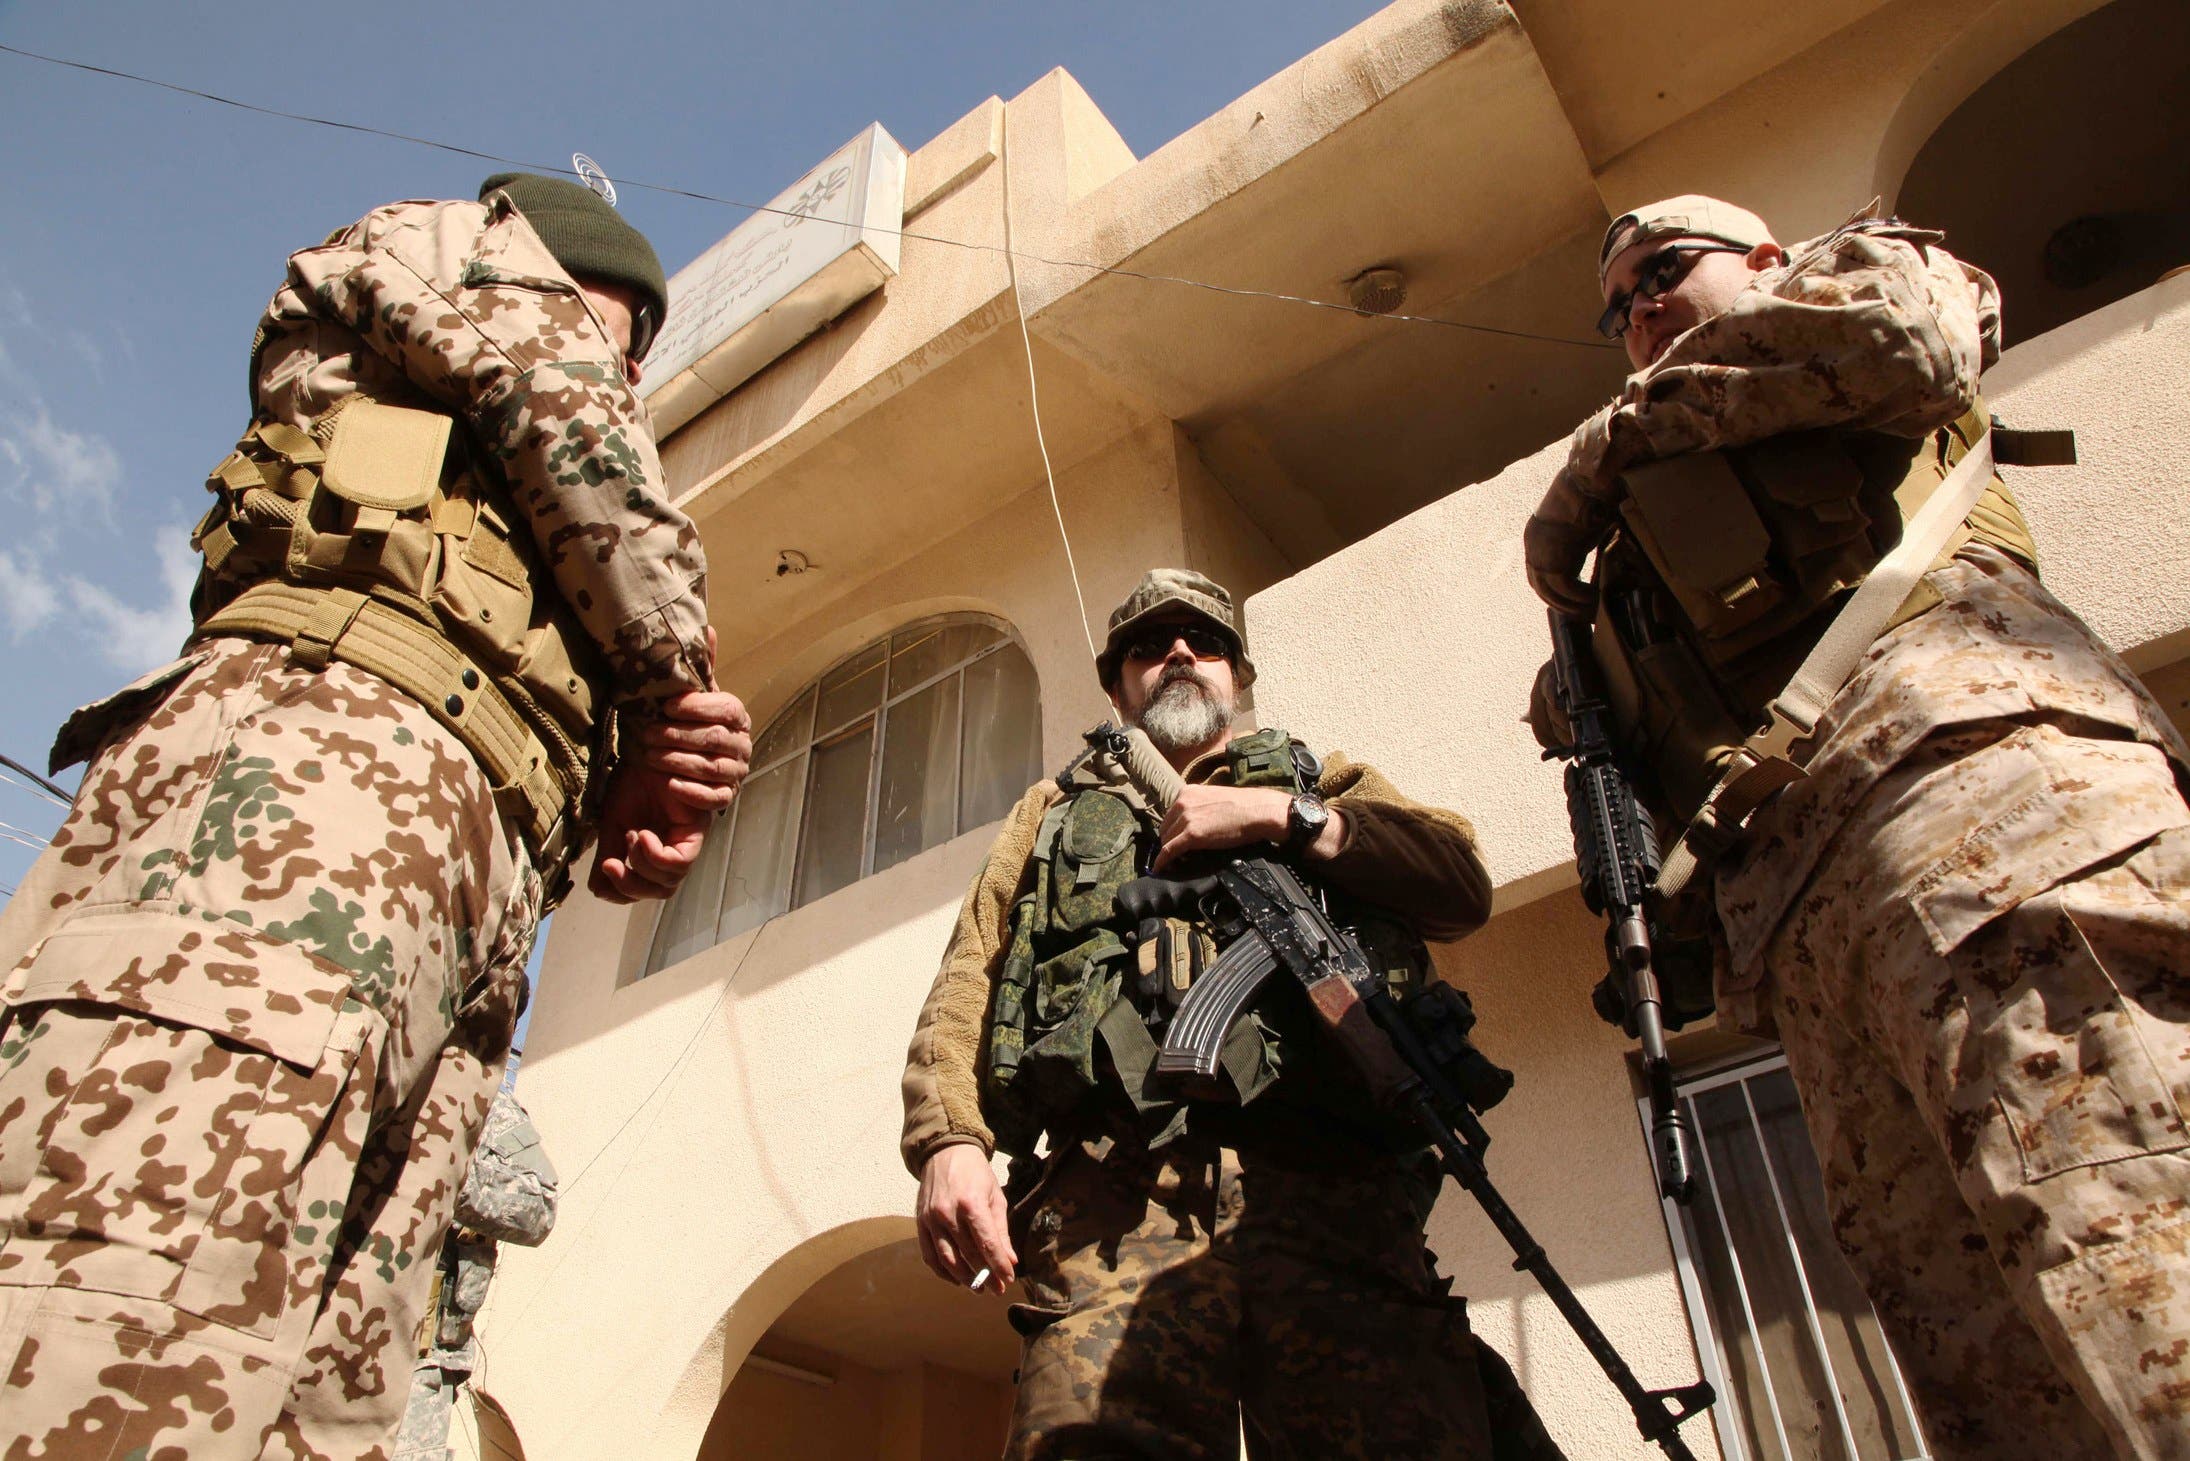 Westerners join Iraqi Christians to fight ISIS